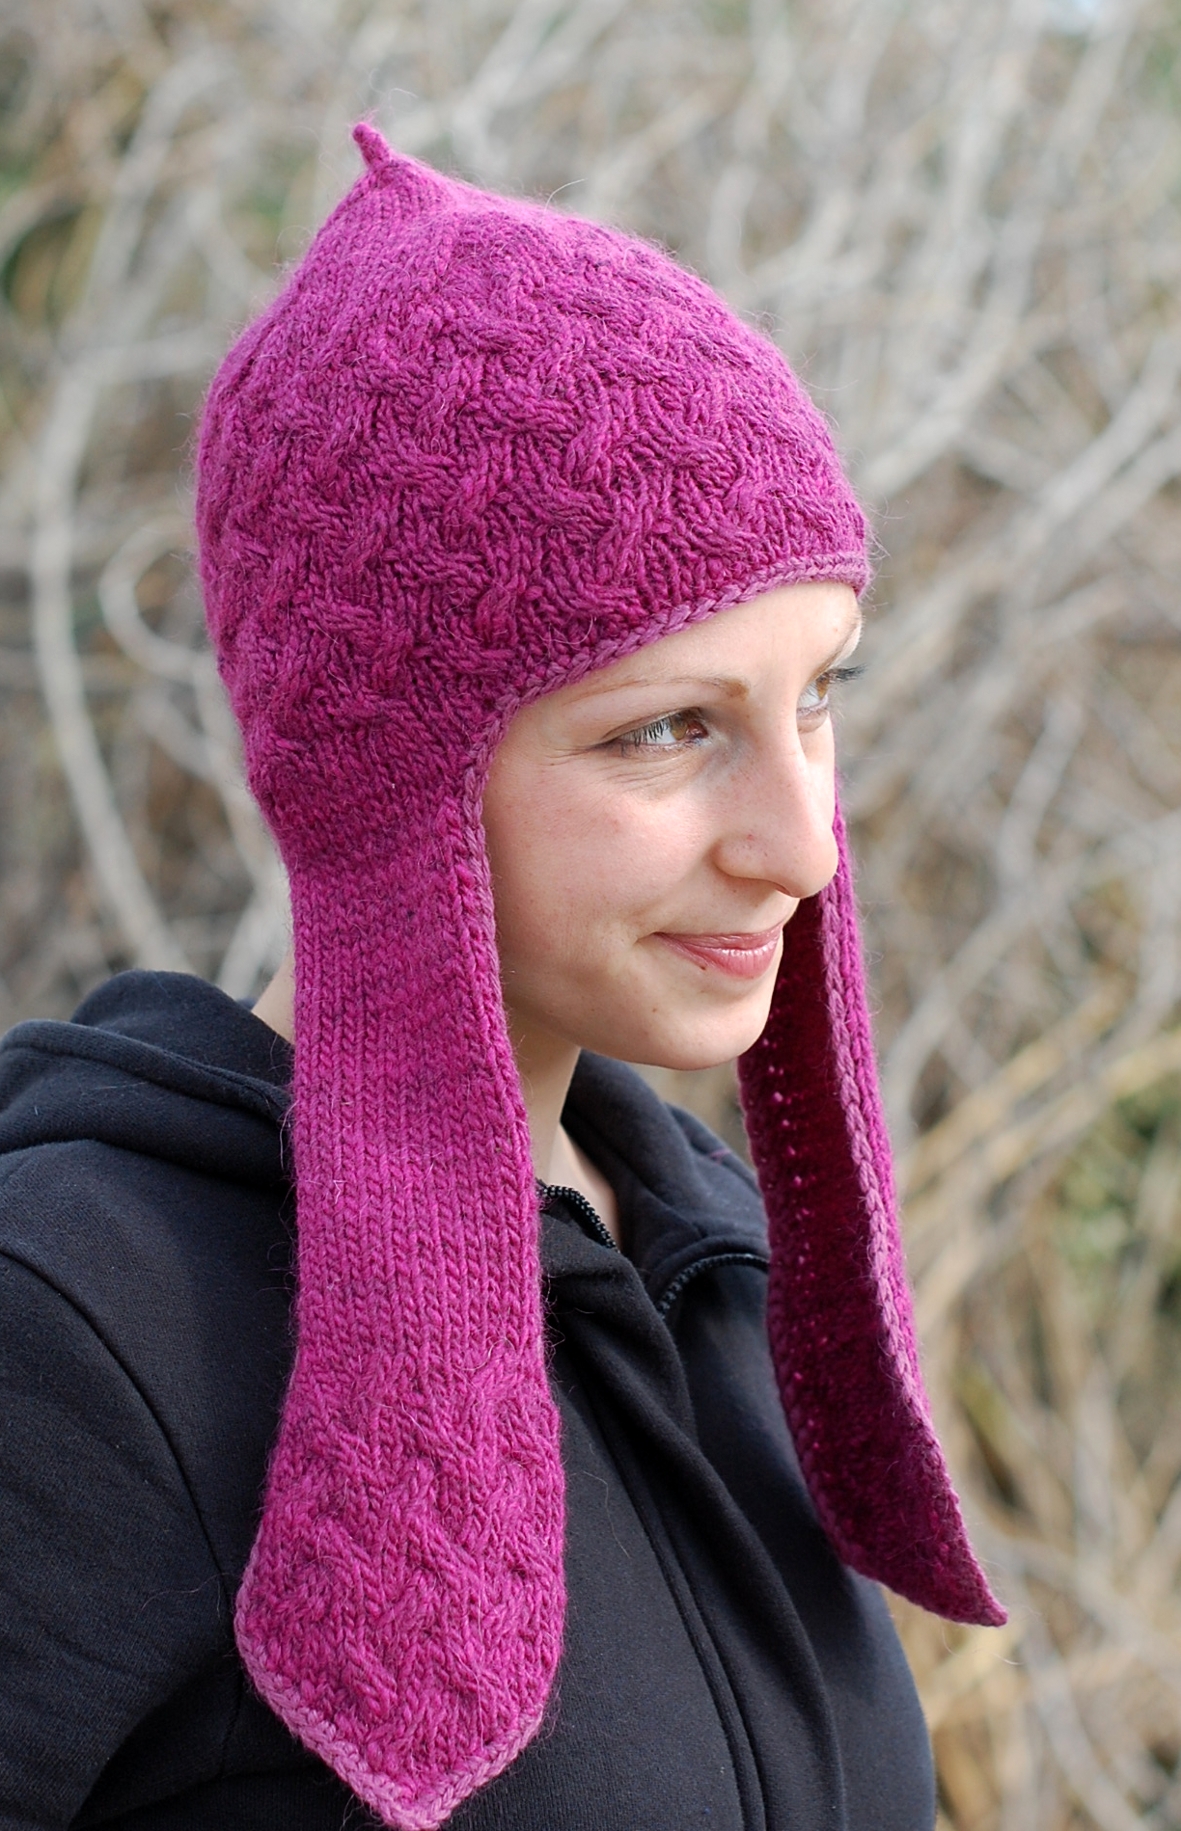 Flapy Cabler cabled pixie earflap Hat knitting pattern